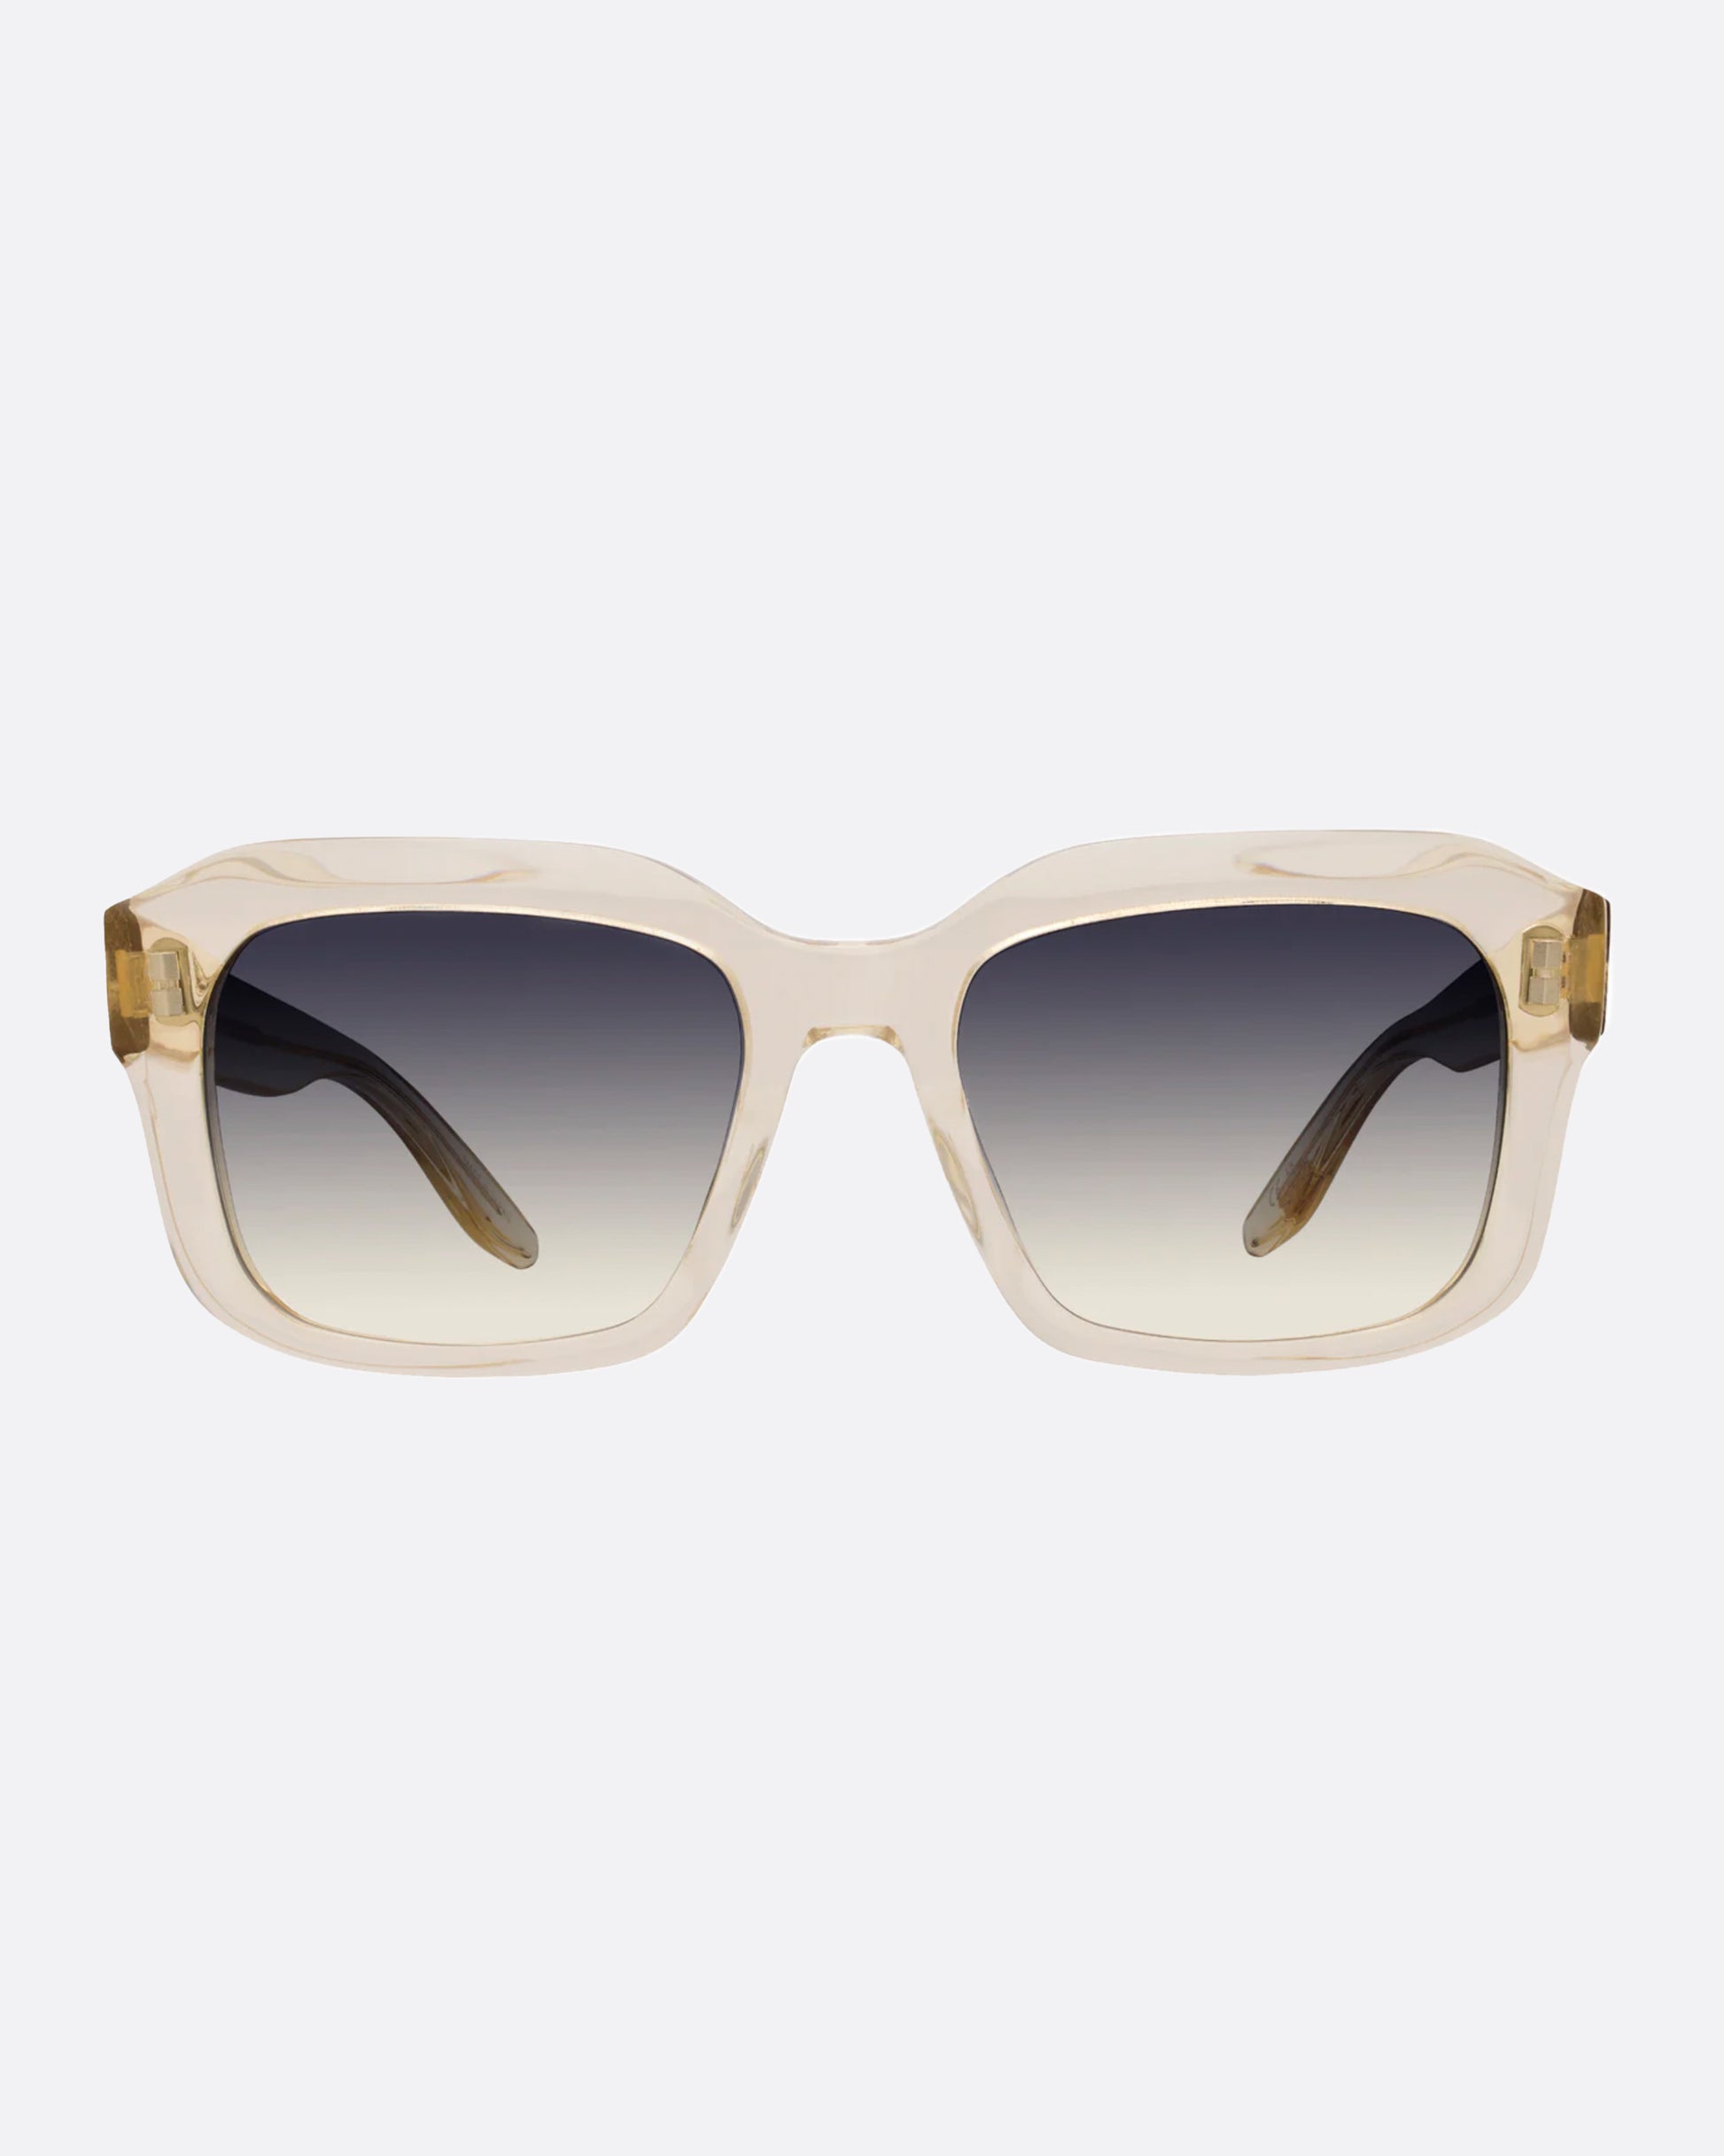 A pair of clear champagne acetate sunglasses with gray ombré lenses.